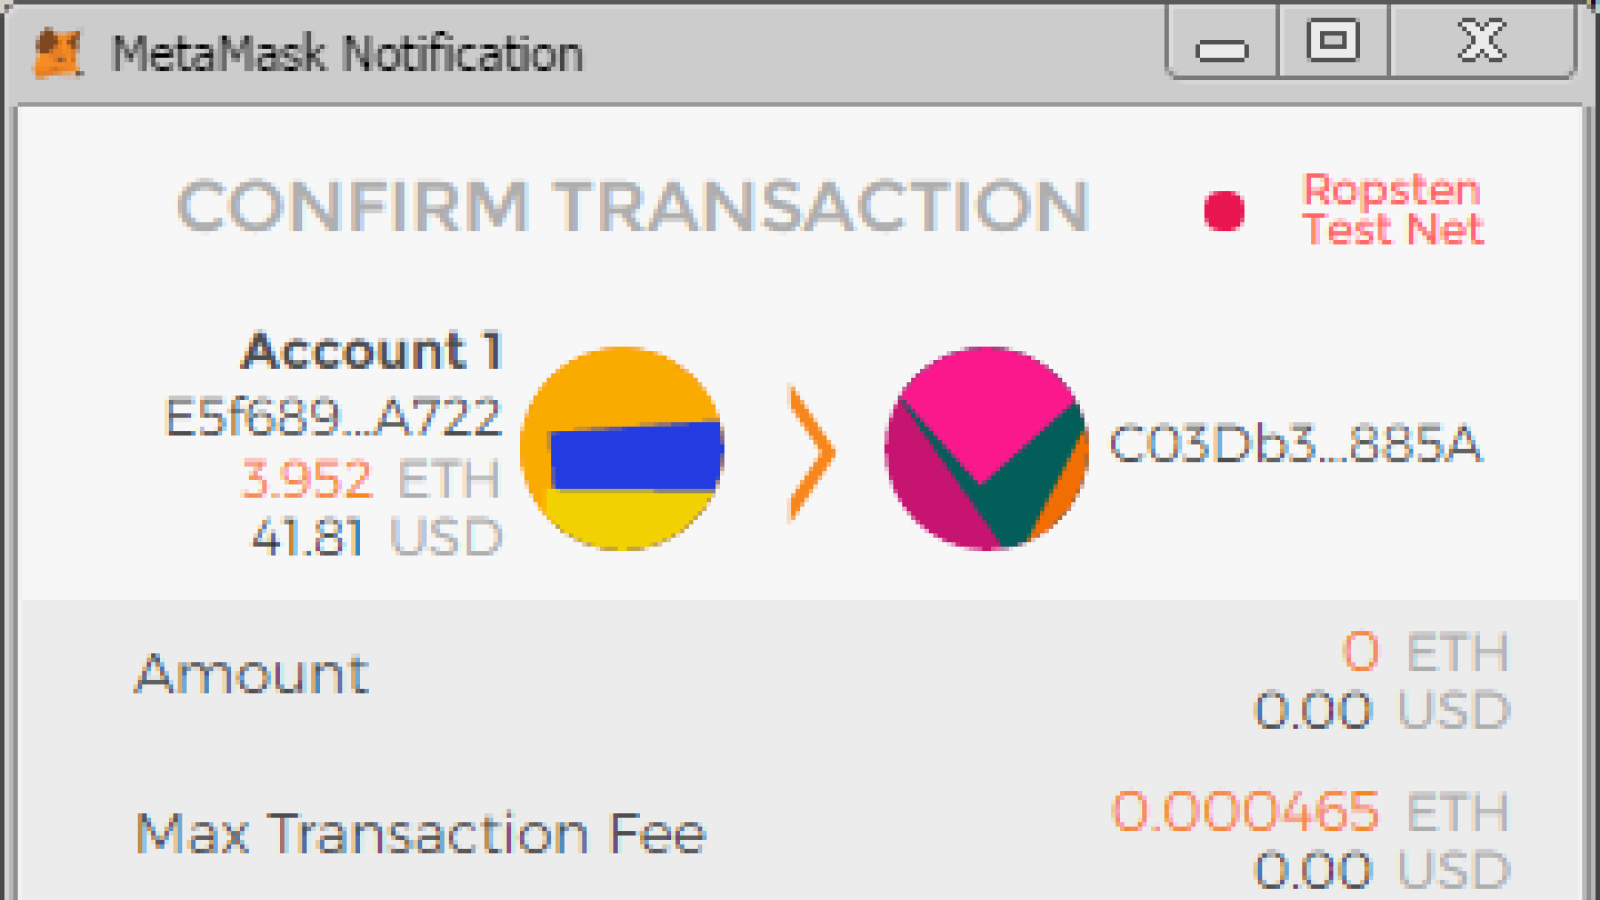 MetaMask features a simple interface